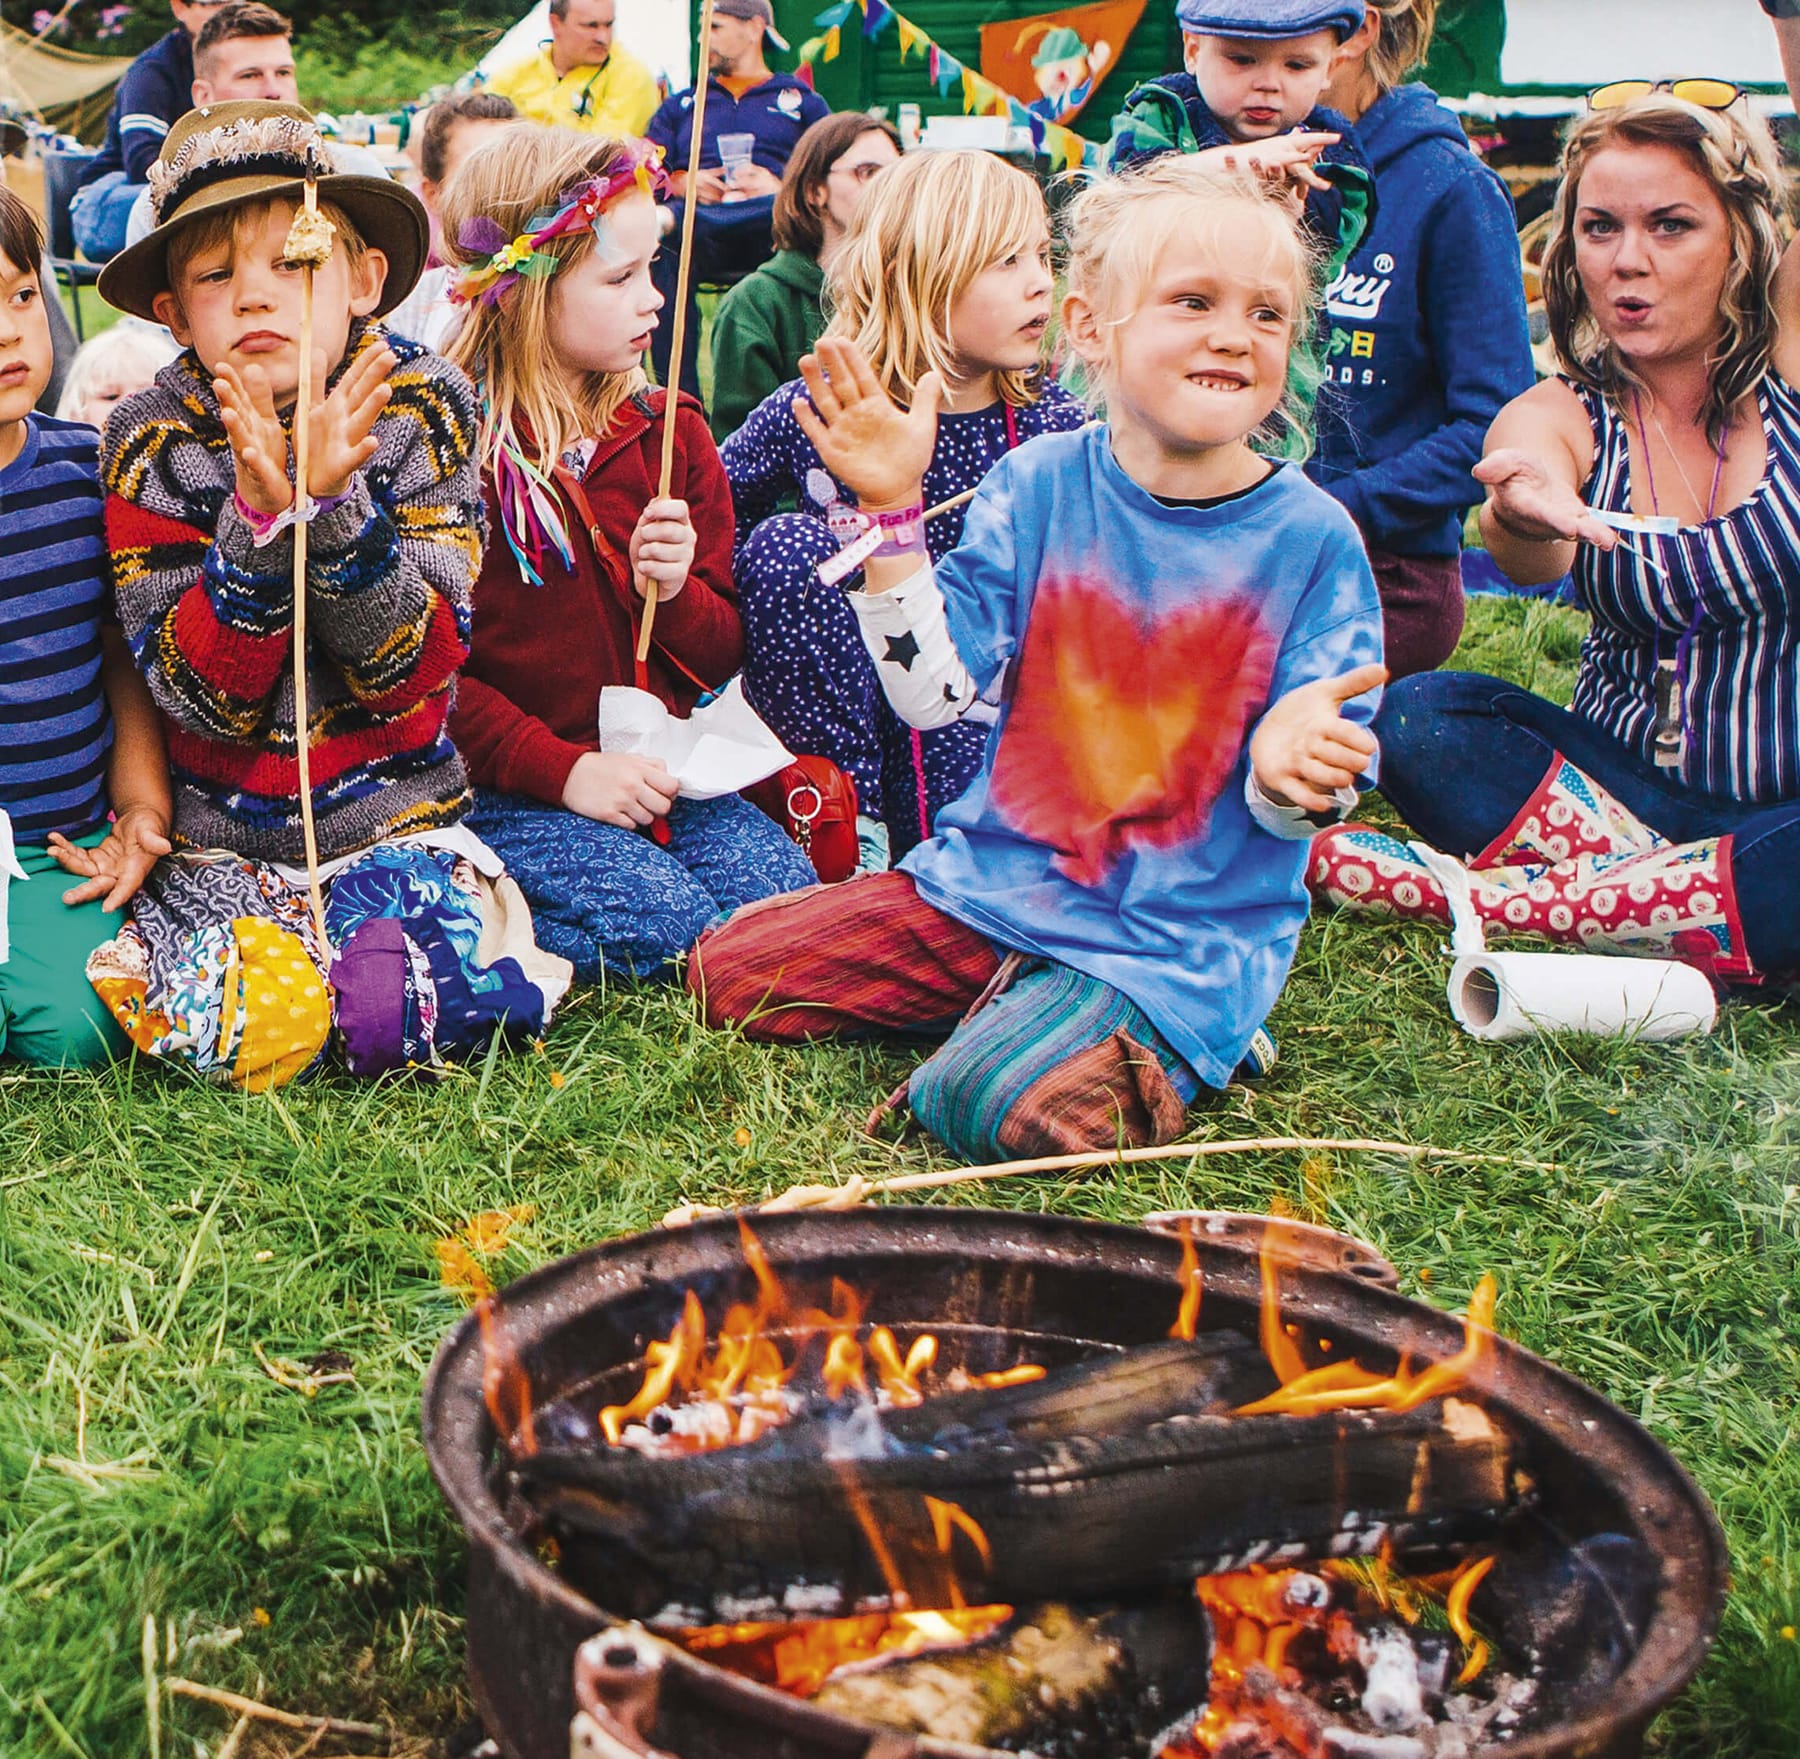 Photograph shows children at a festival kneeling in front of a fire bowl with marshmallows on sticks